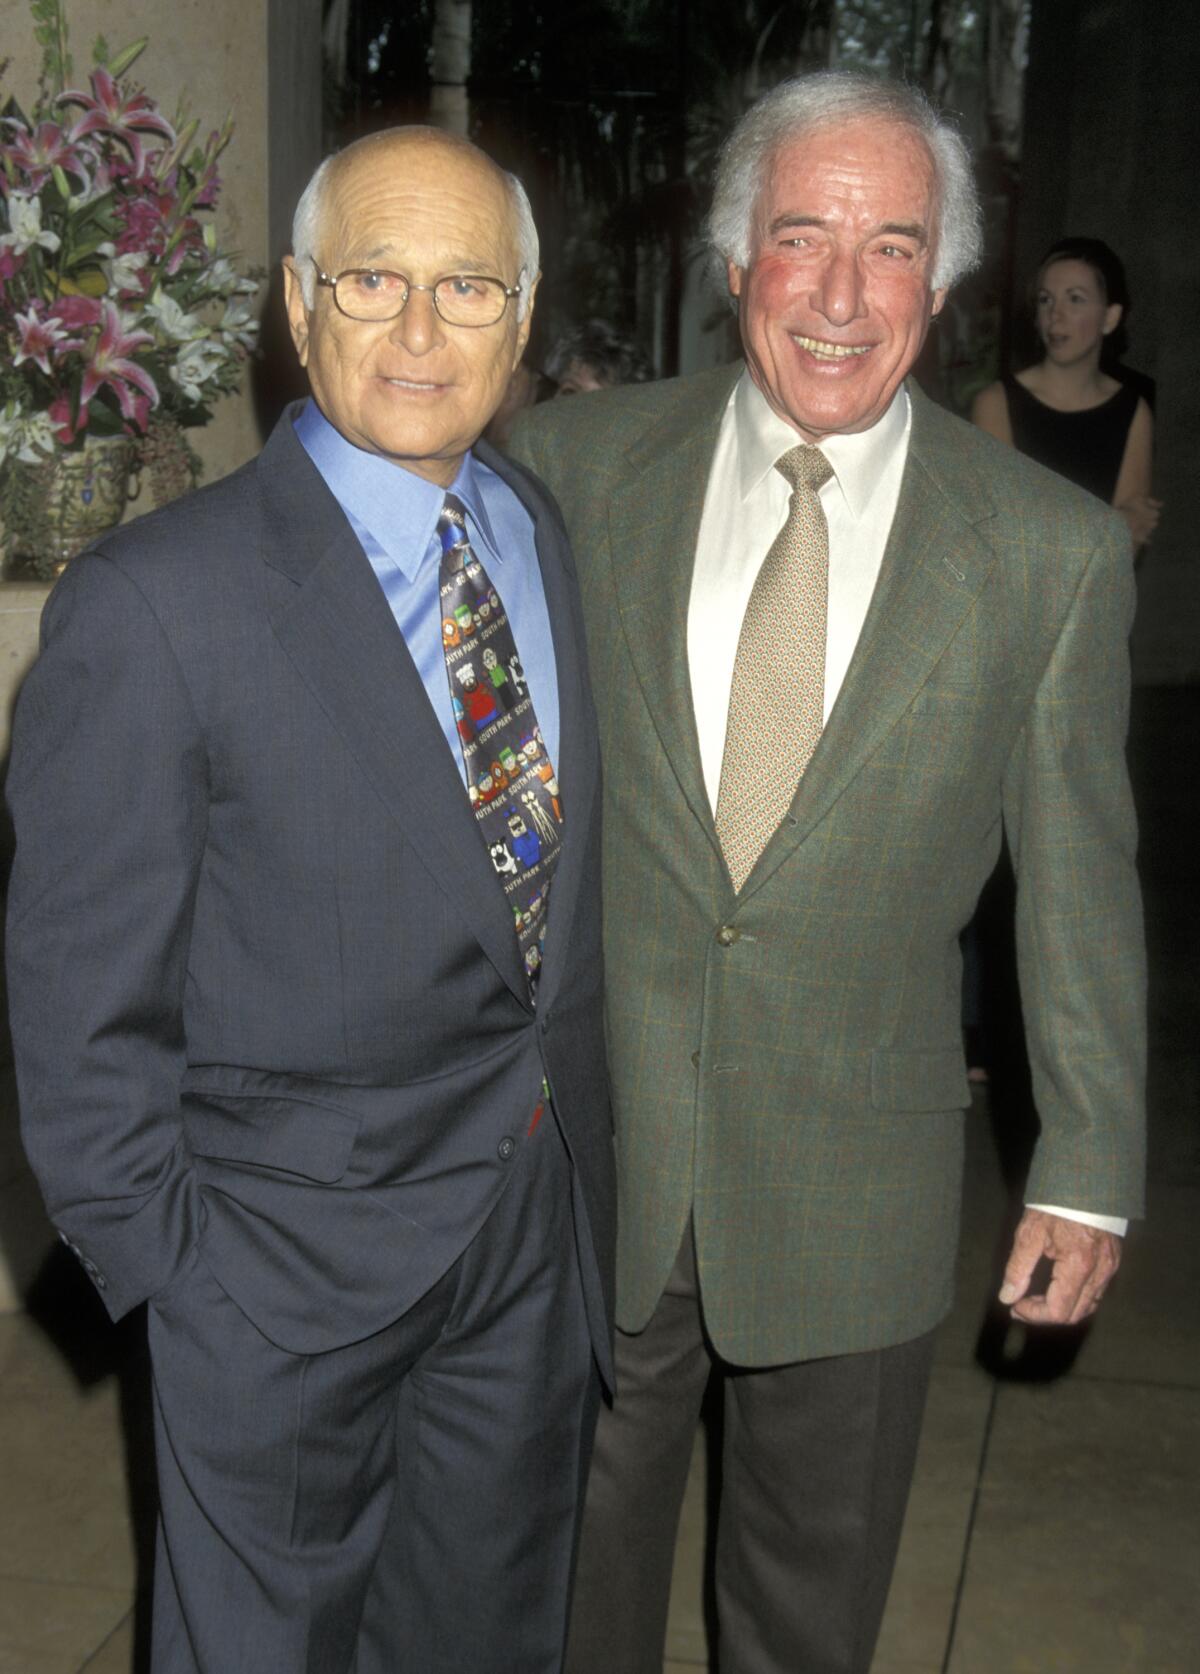 Writer-producer Norman Lear, left, and director Bud Yorkin at the Women in Film Lucy Awards on Sept. 17, 1999 at the Beverly Hilton Hotel.